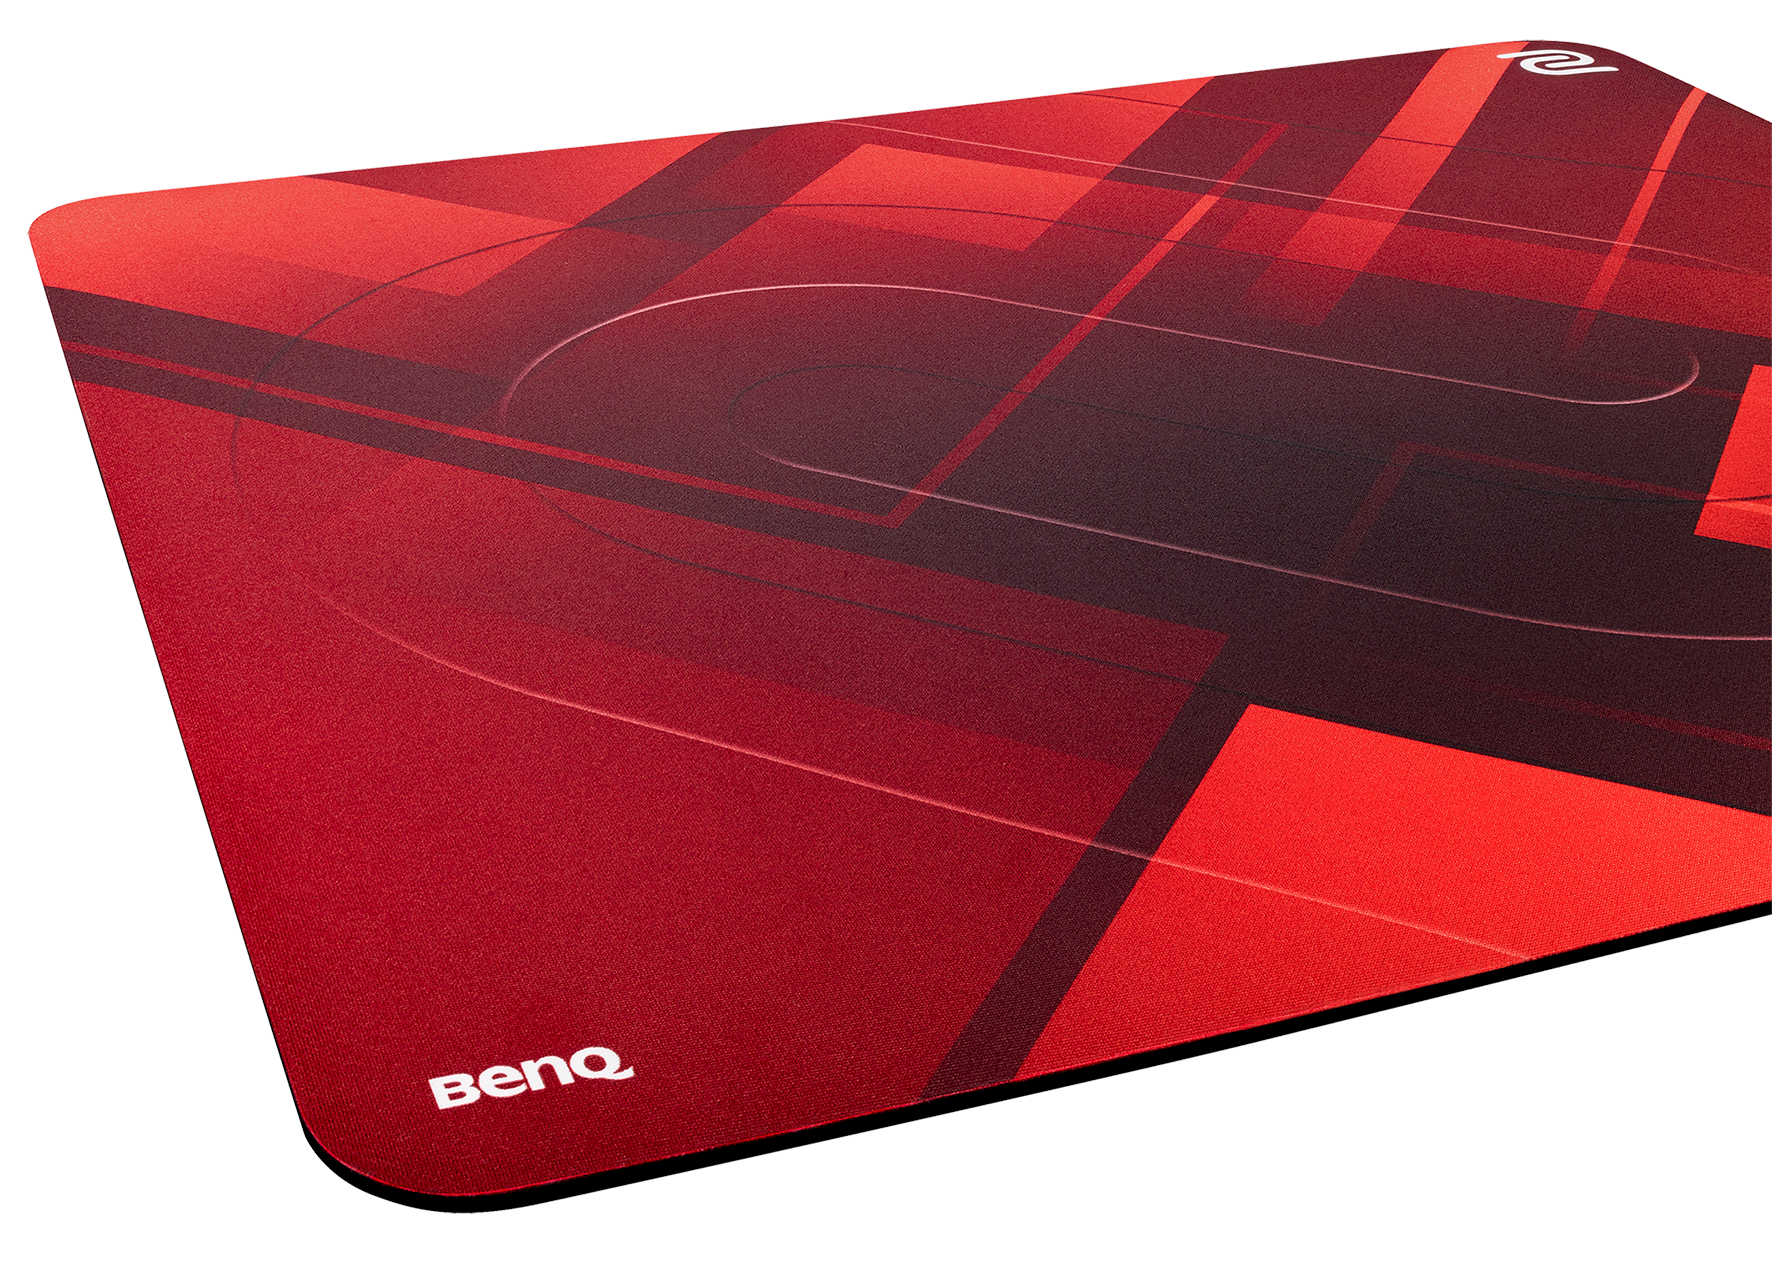 Benq Zowie G Sr Se Divina Pink Gaming Mouse Pad For Esports